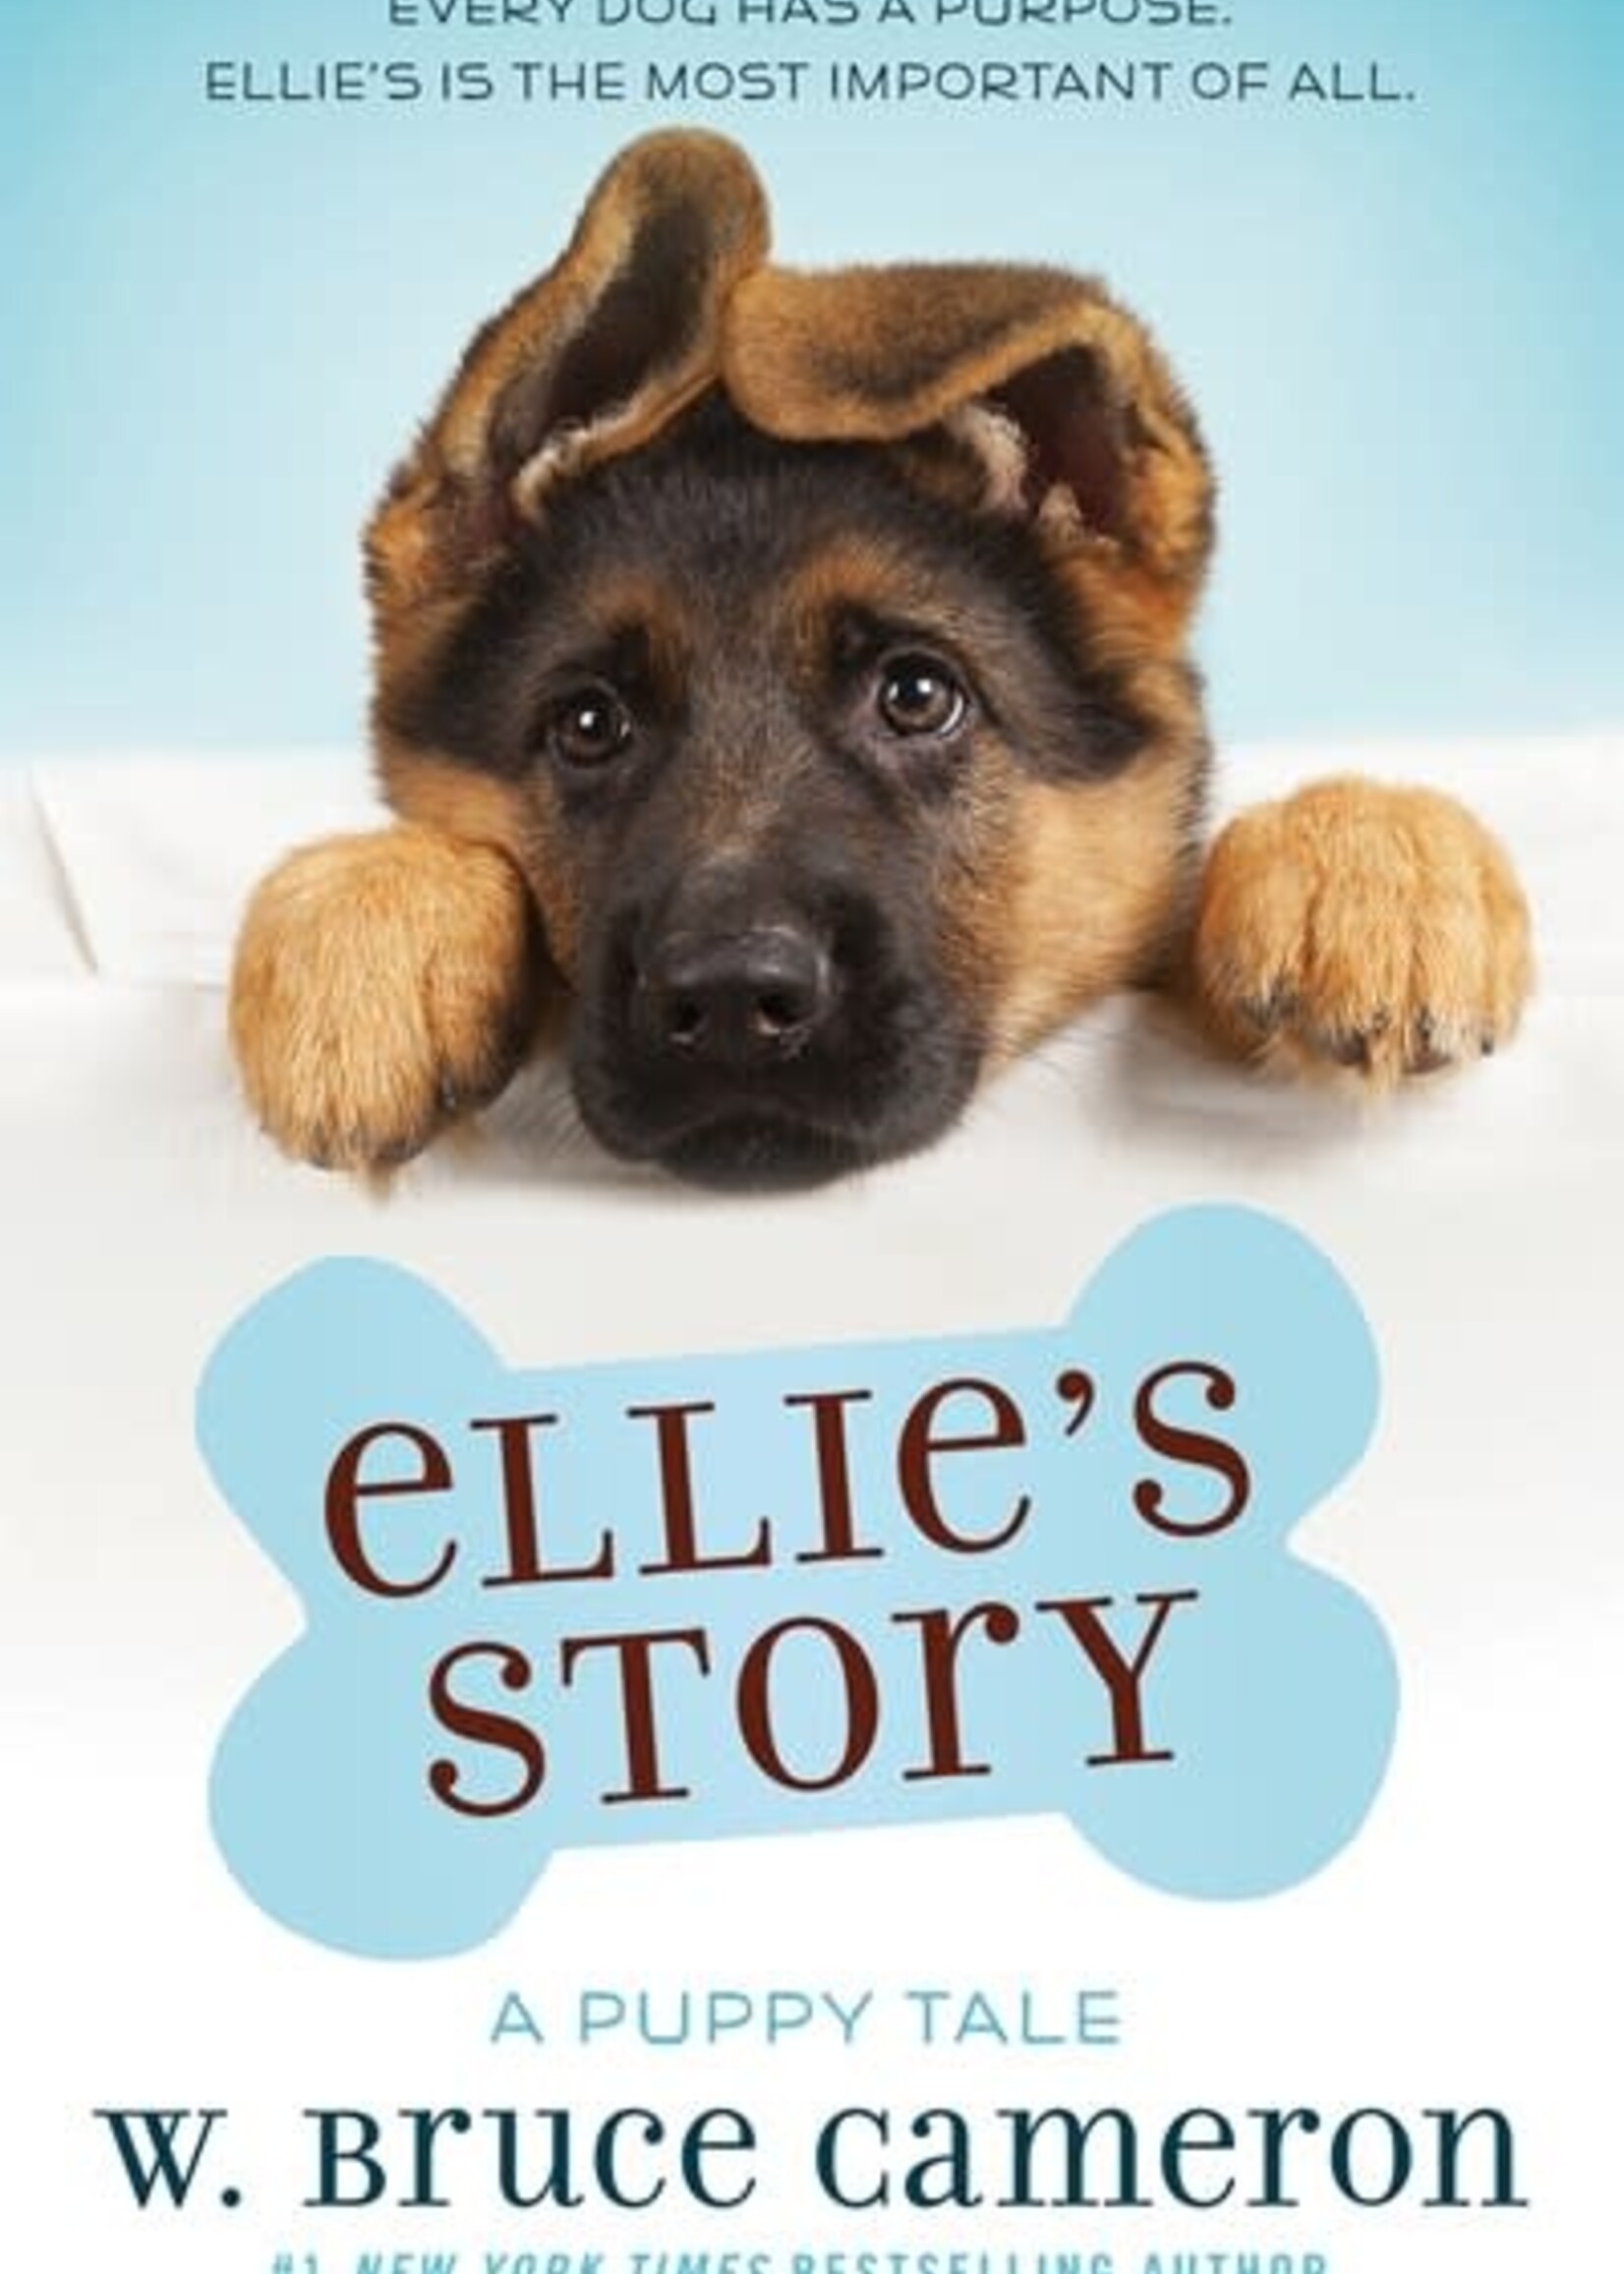 Puppy Tale 1 Ellie's Story